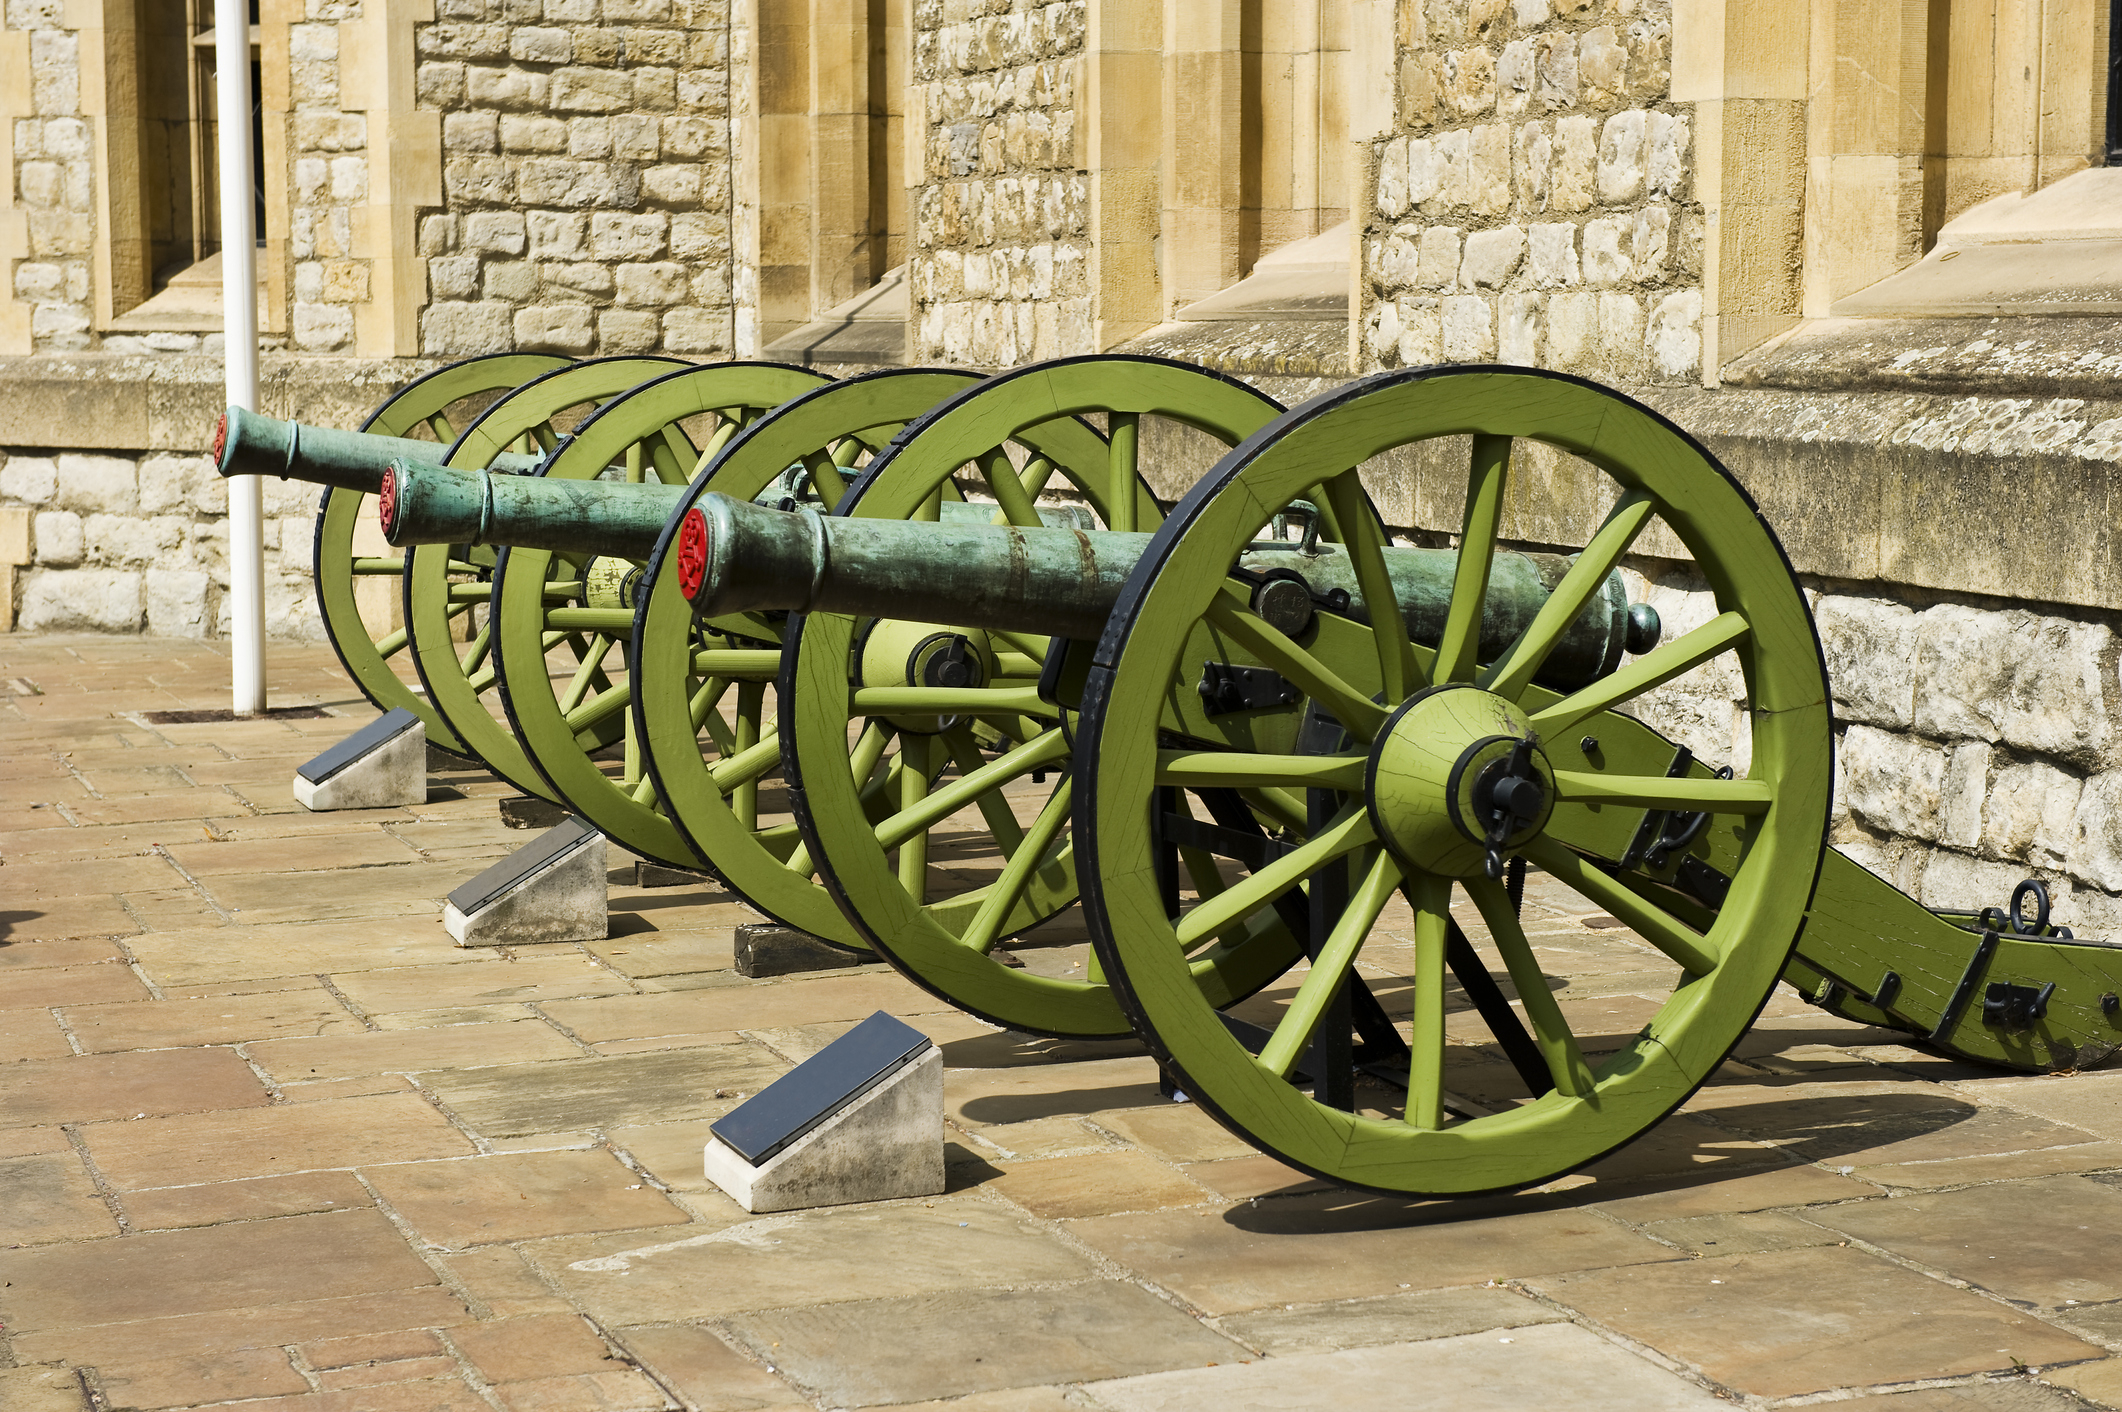 Historic green cannons, aligned in a row, displayed outdoors against the Tower of London